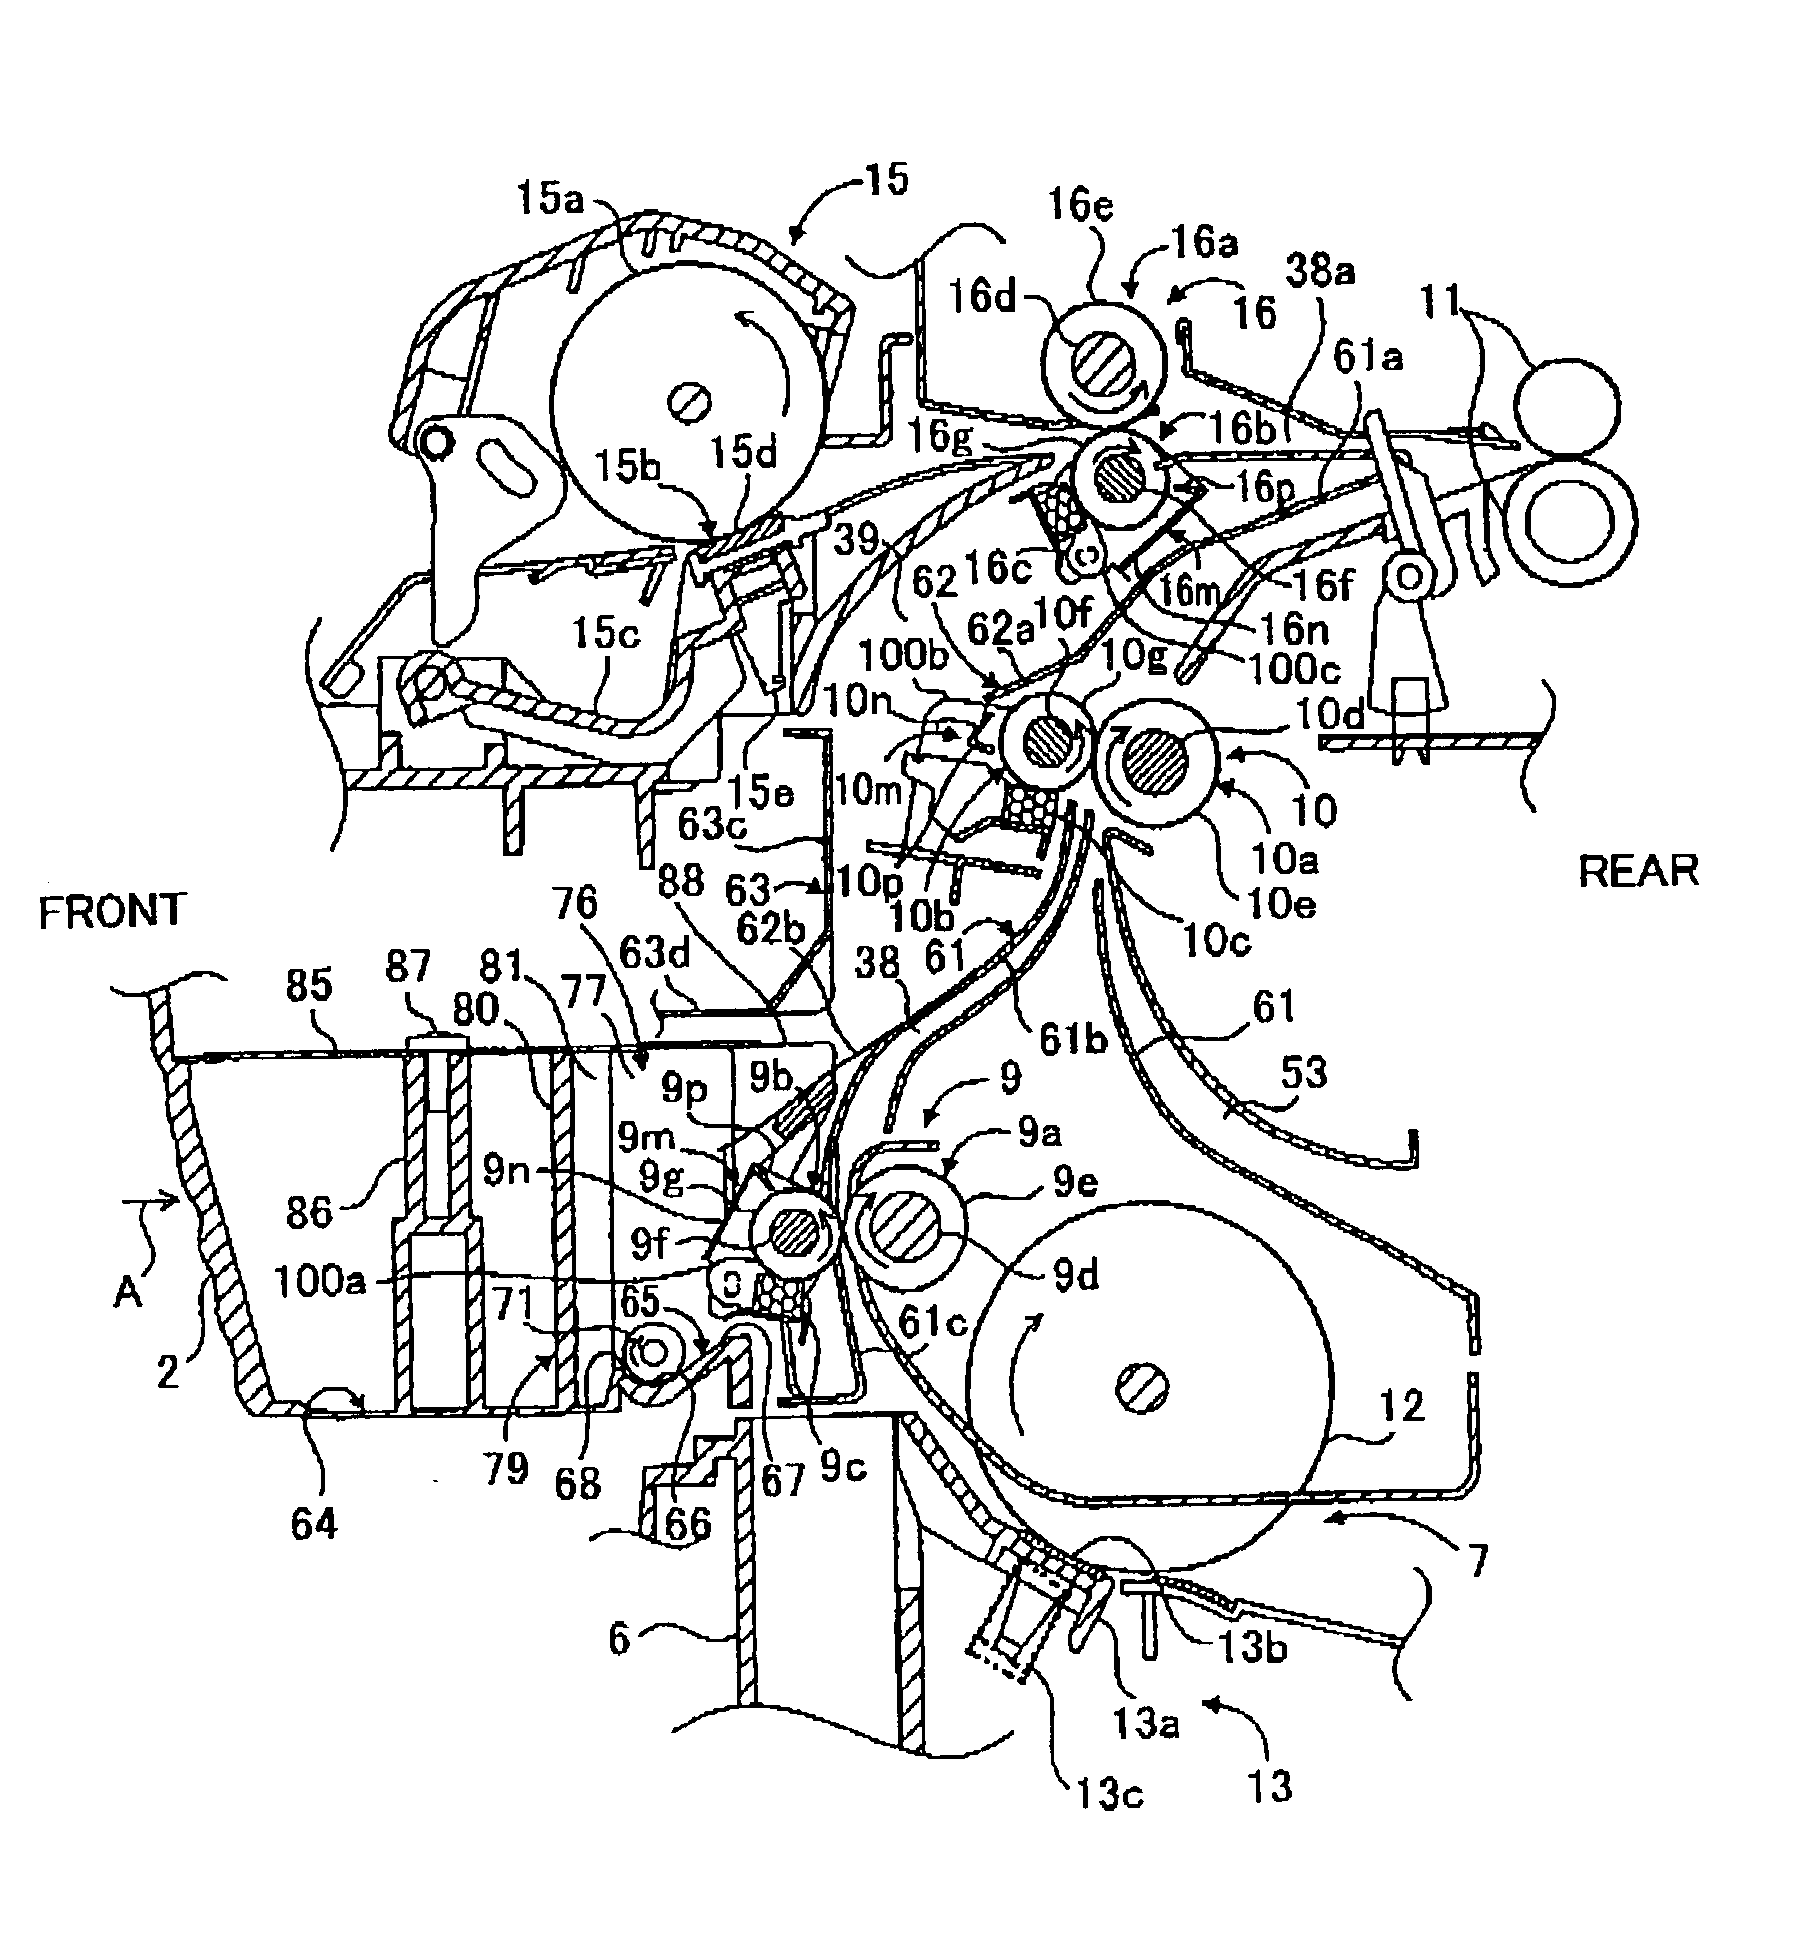 Image forming device having paper dust removing units